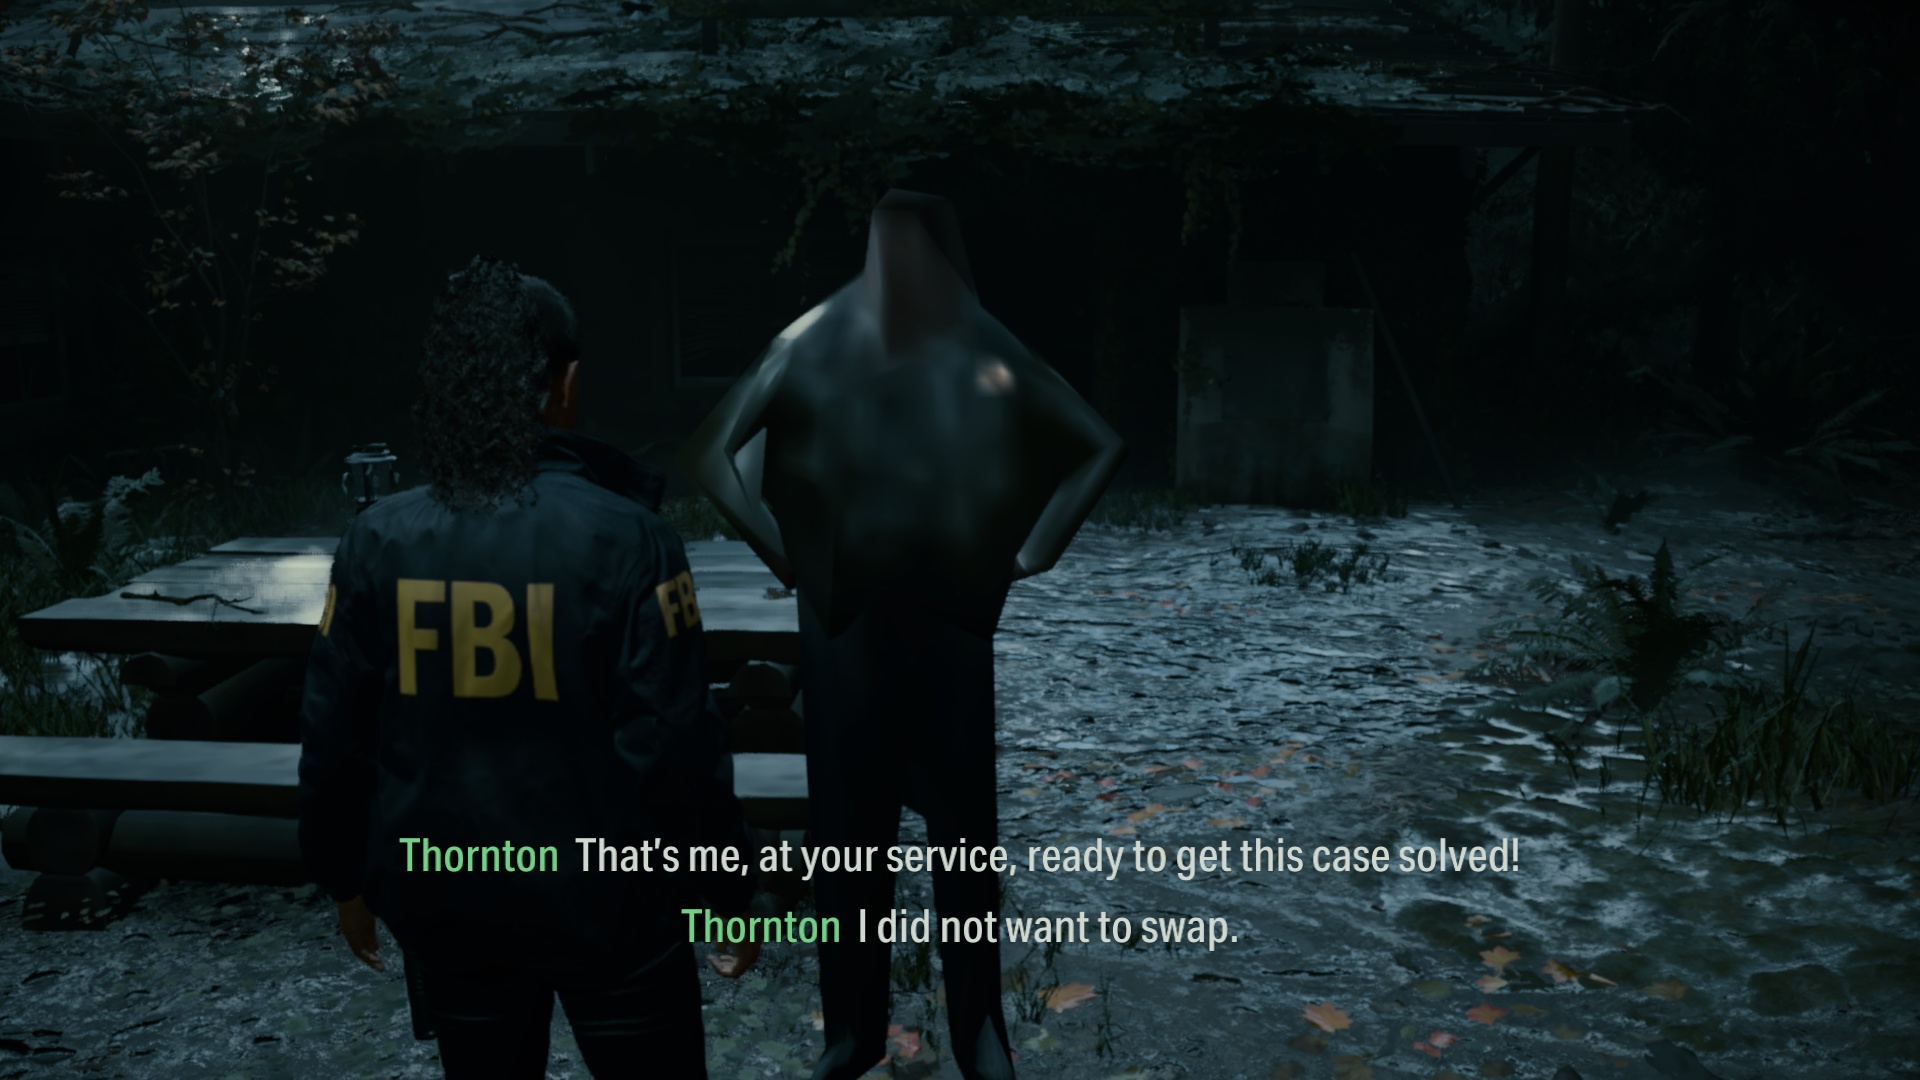 (If you play Alan Wake 2 with slow hardware, you may experience graphics errors (Image: Reddit user KeitaAcreman))